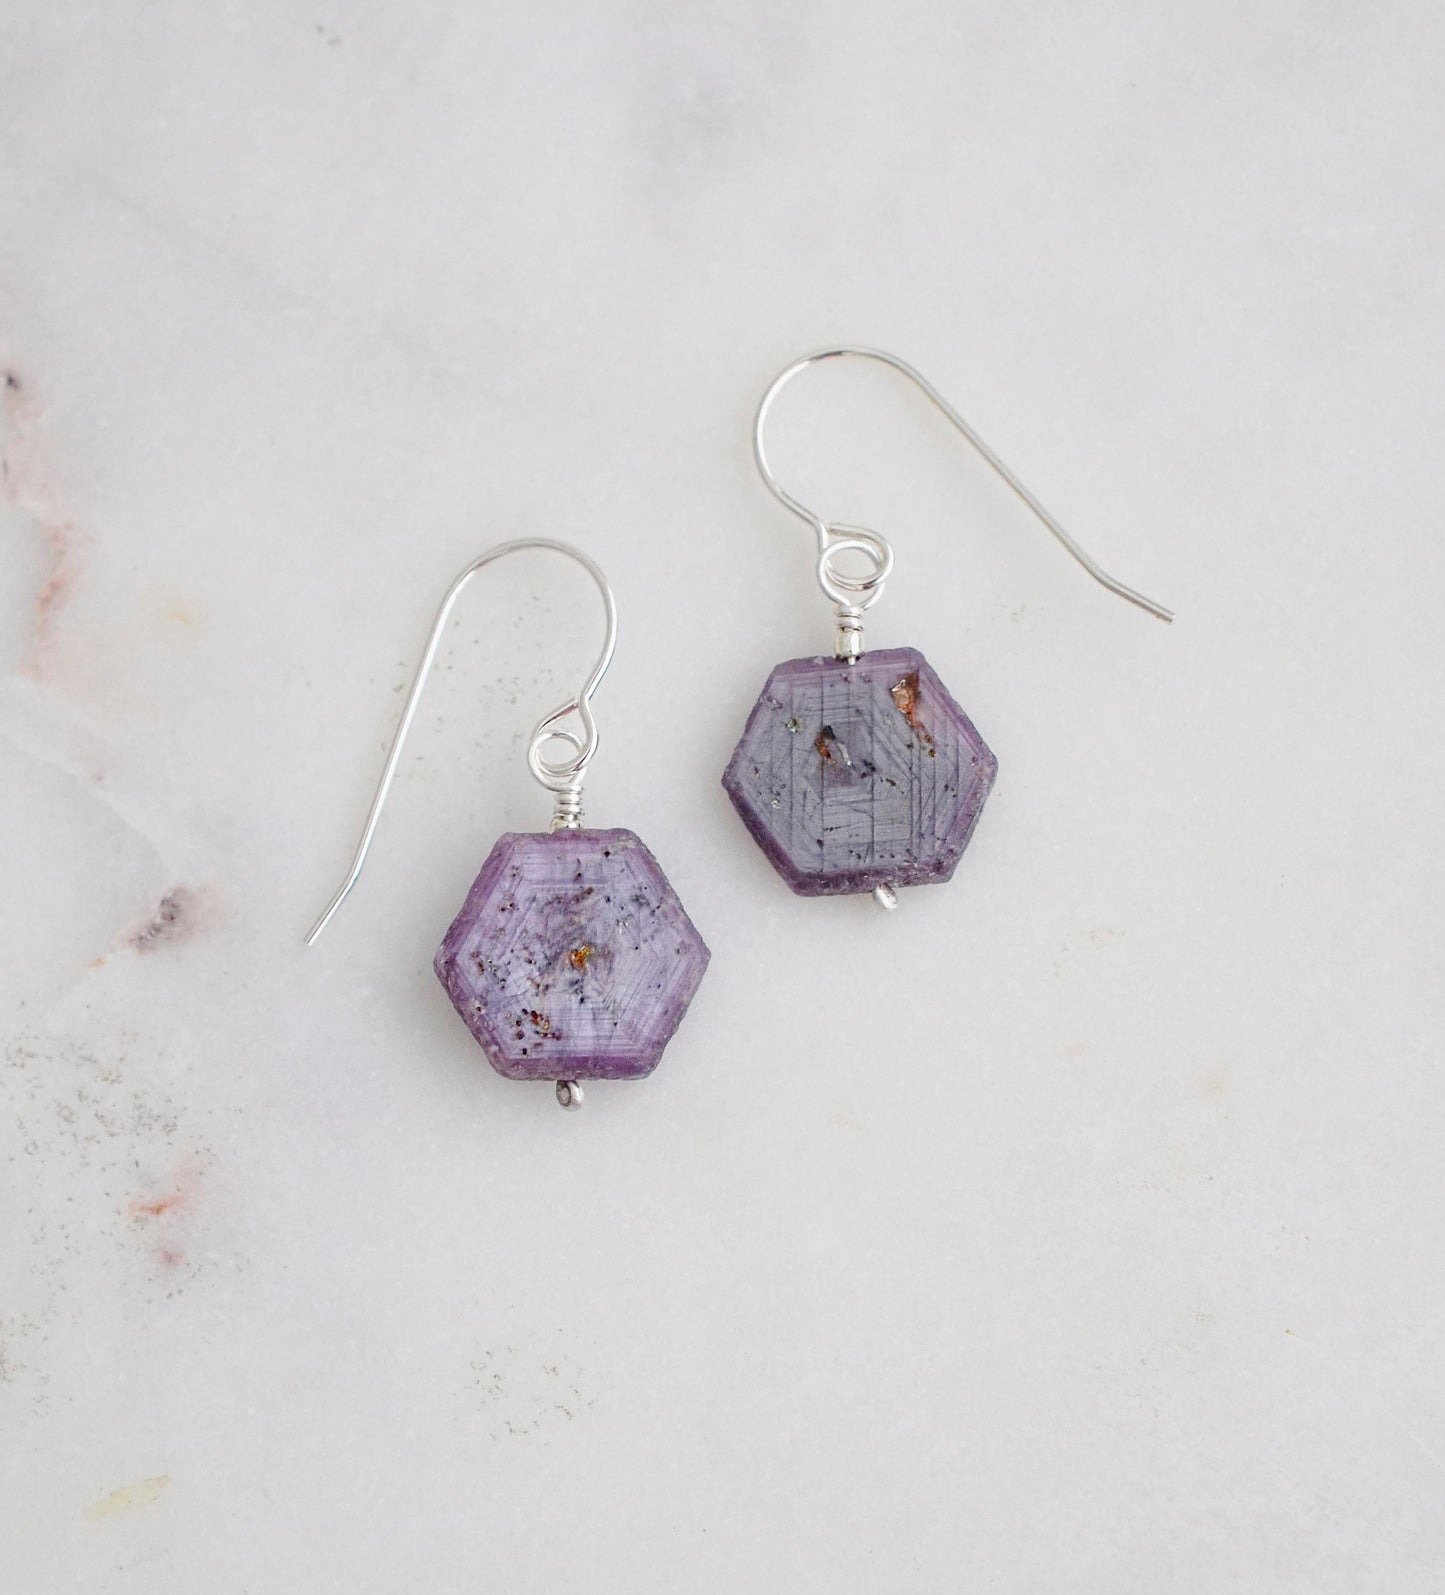 Purple-pink raw ruby stones suspended from sterling silver earwires. The stones are rough and in their natural hexagonal shape. 